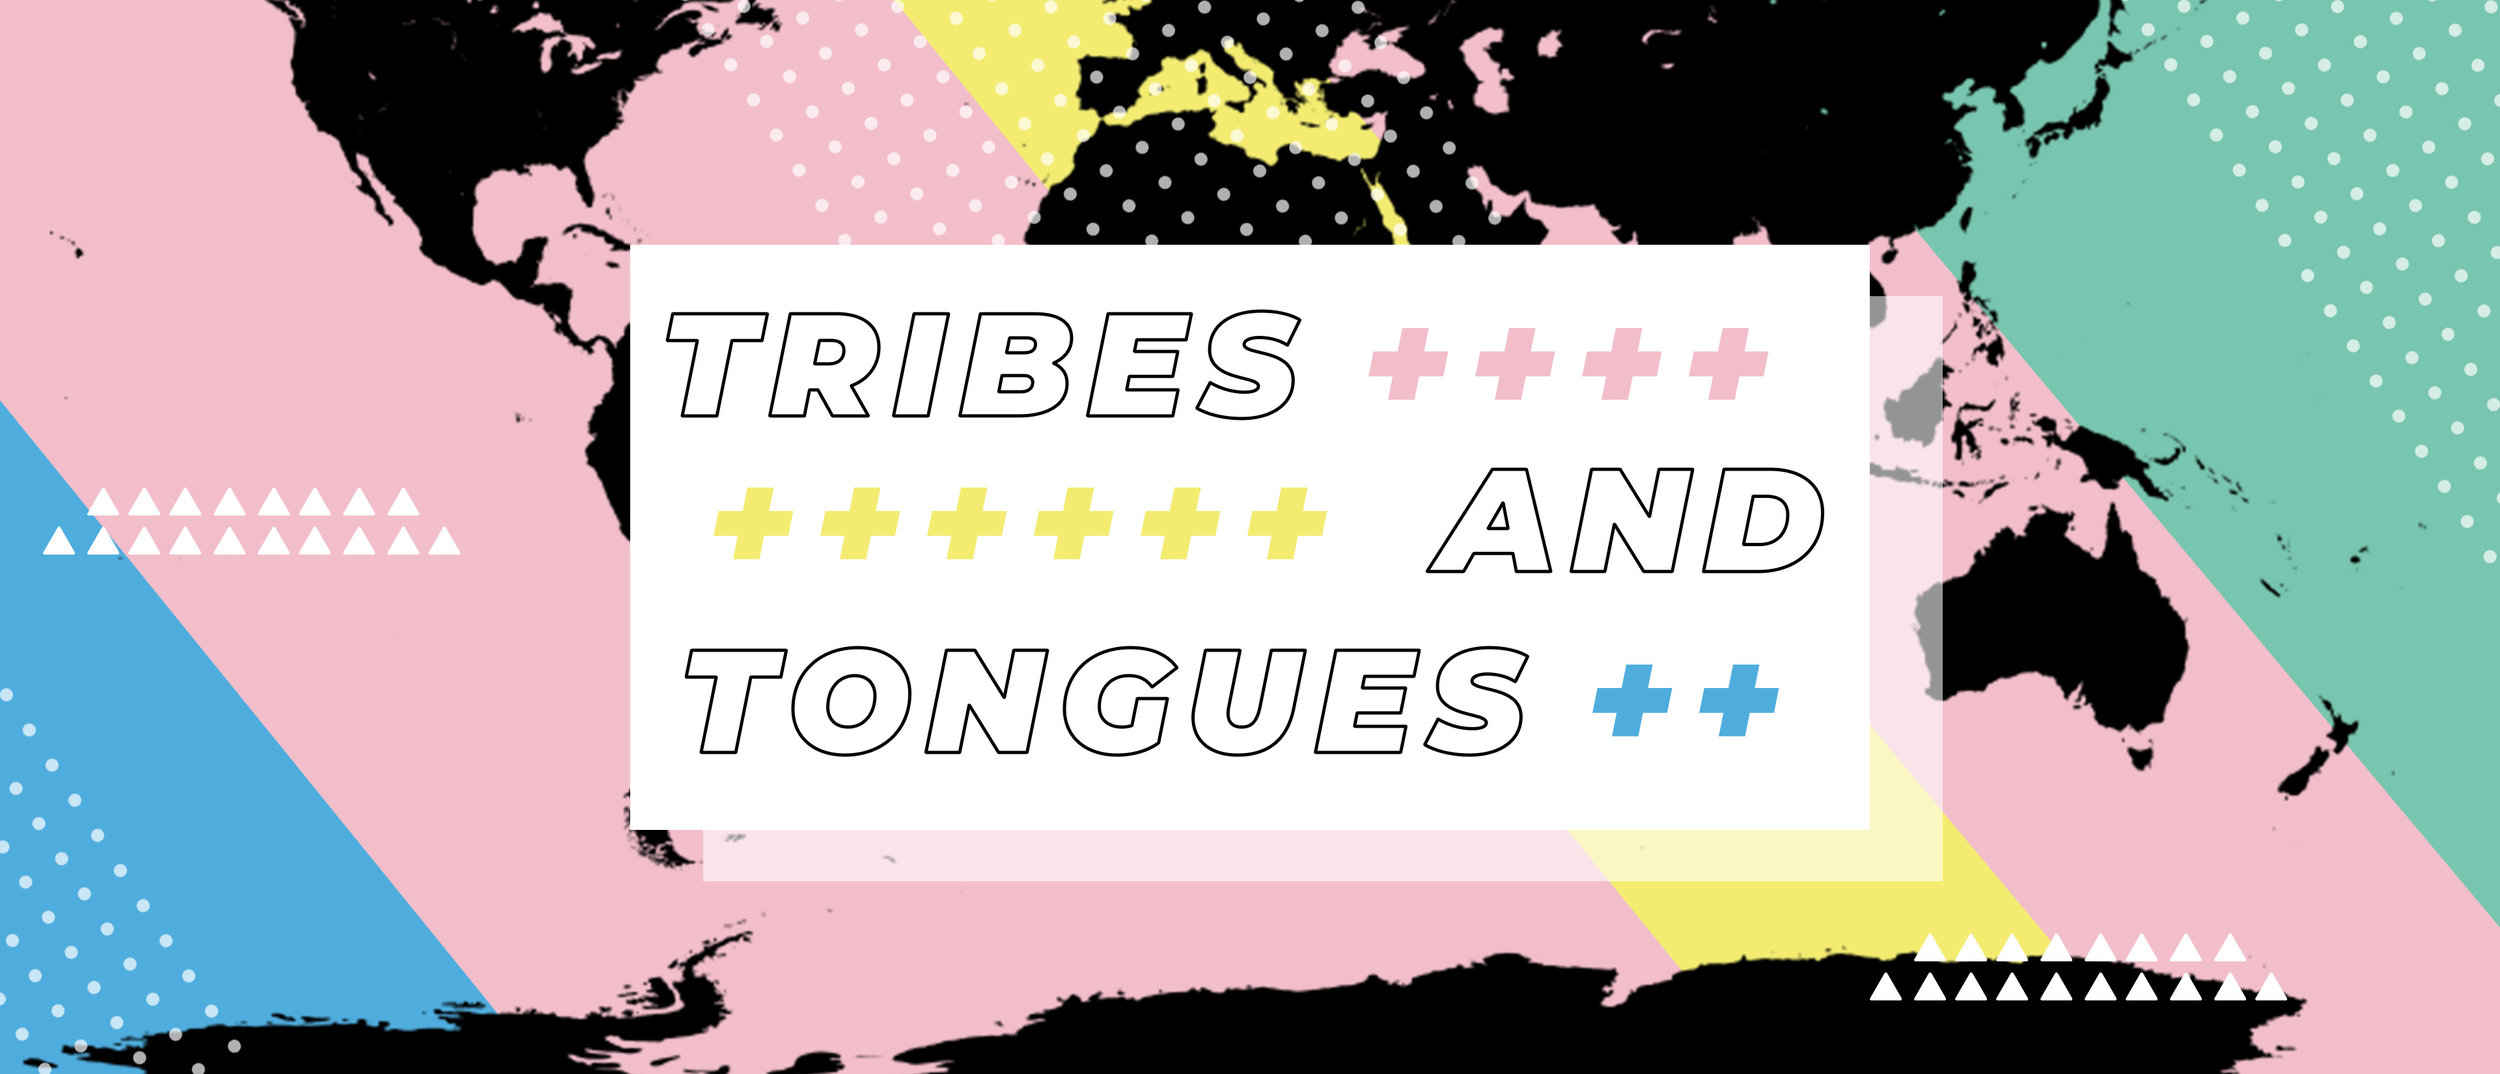 Tribes and Tongues.jpg